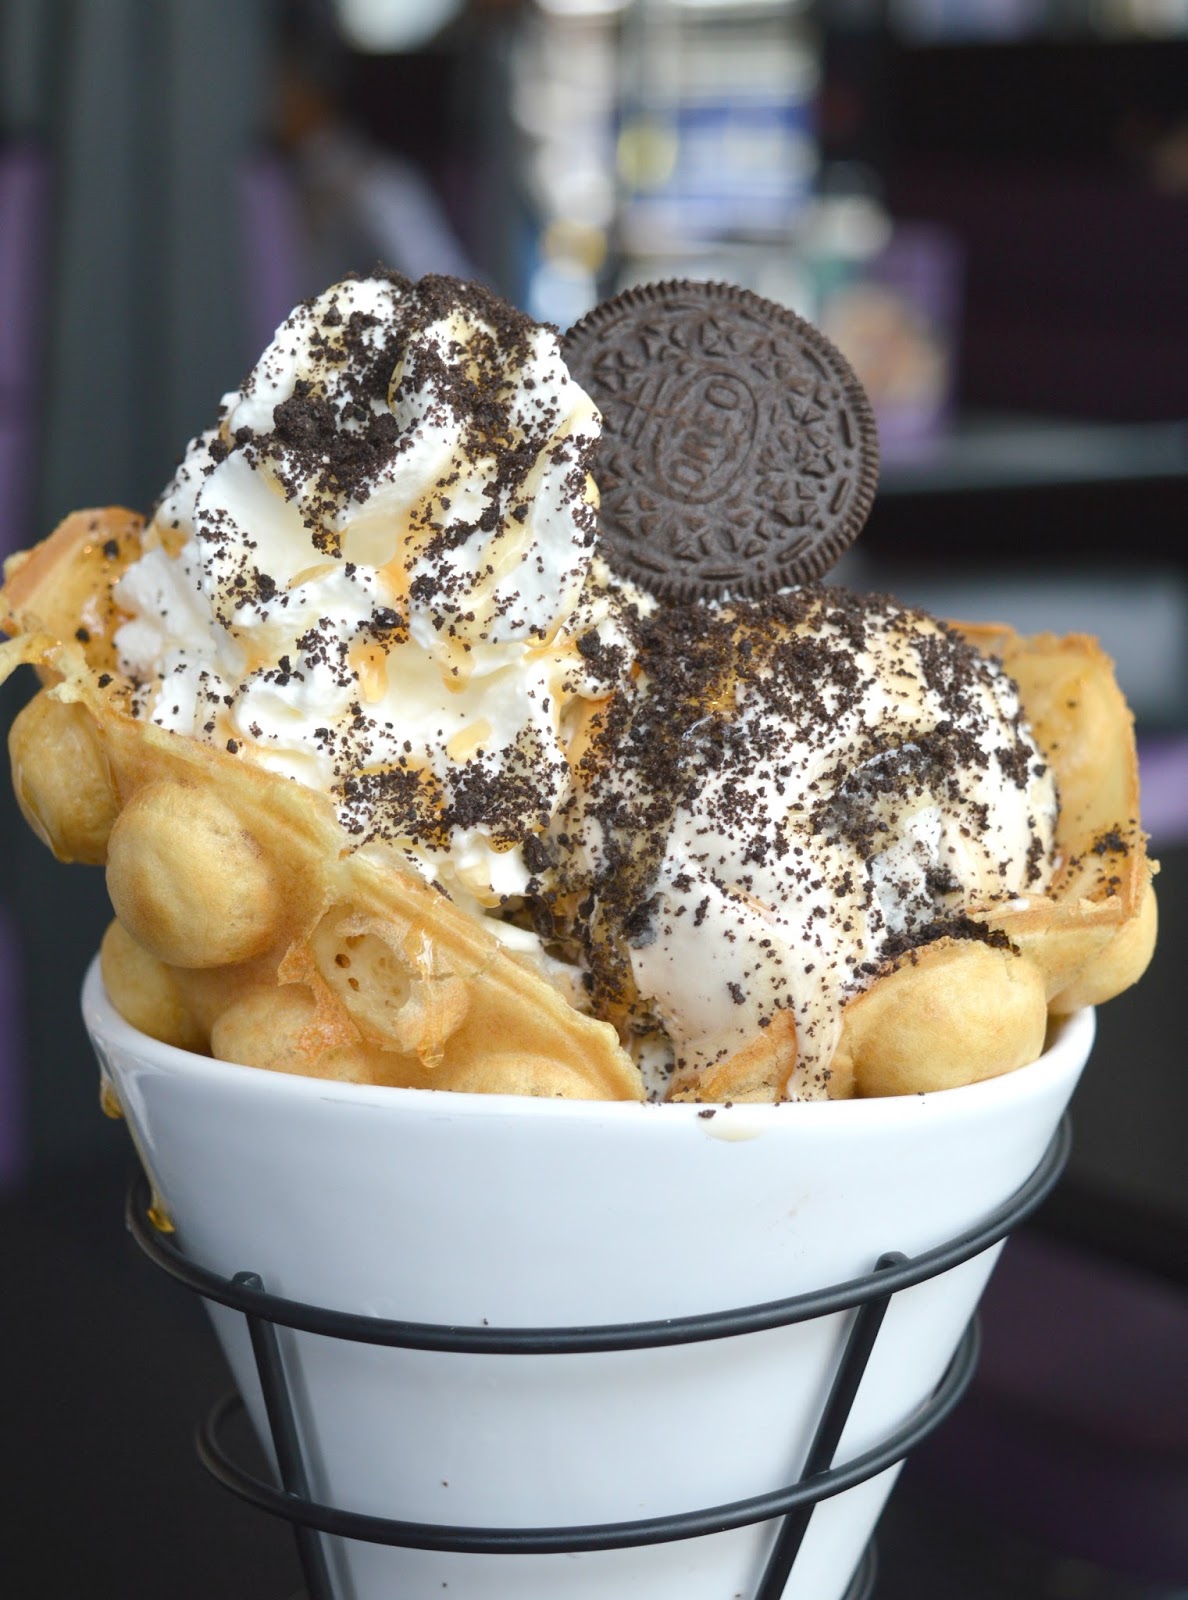 Creams Cafe Newcastle - The Night of the Bubble Pop Waffle